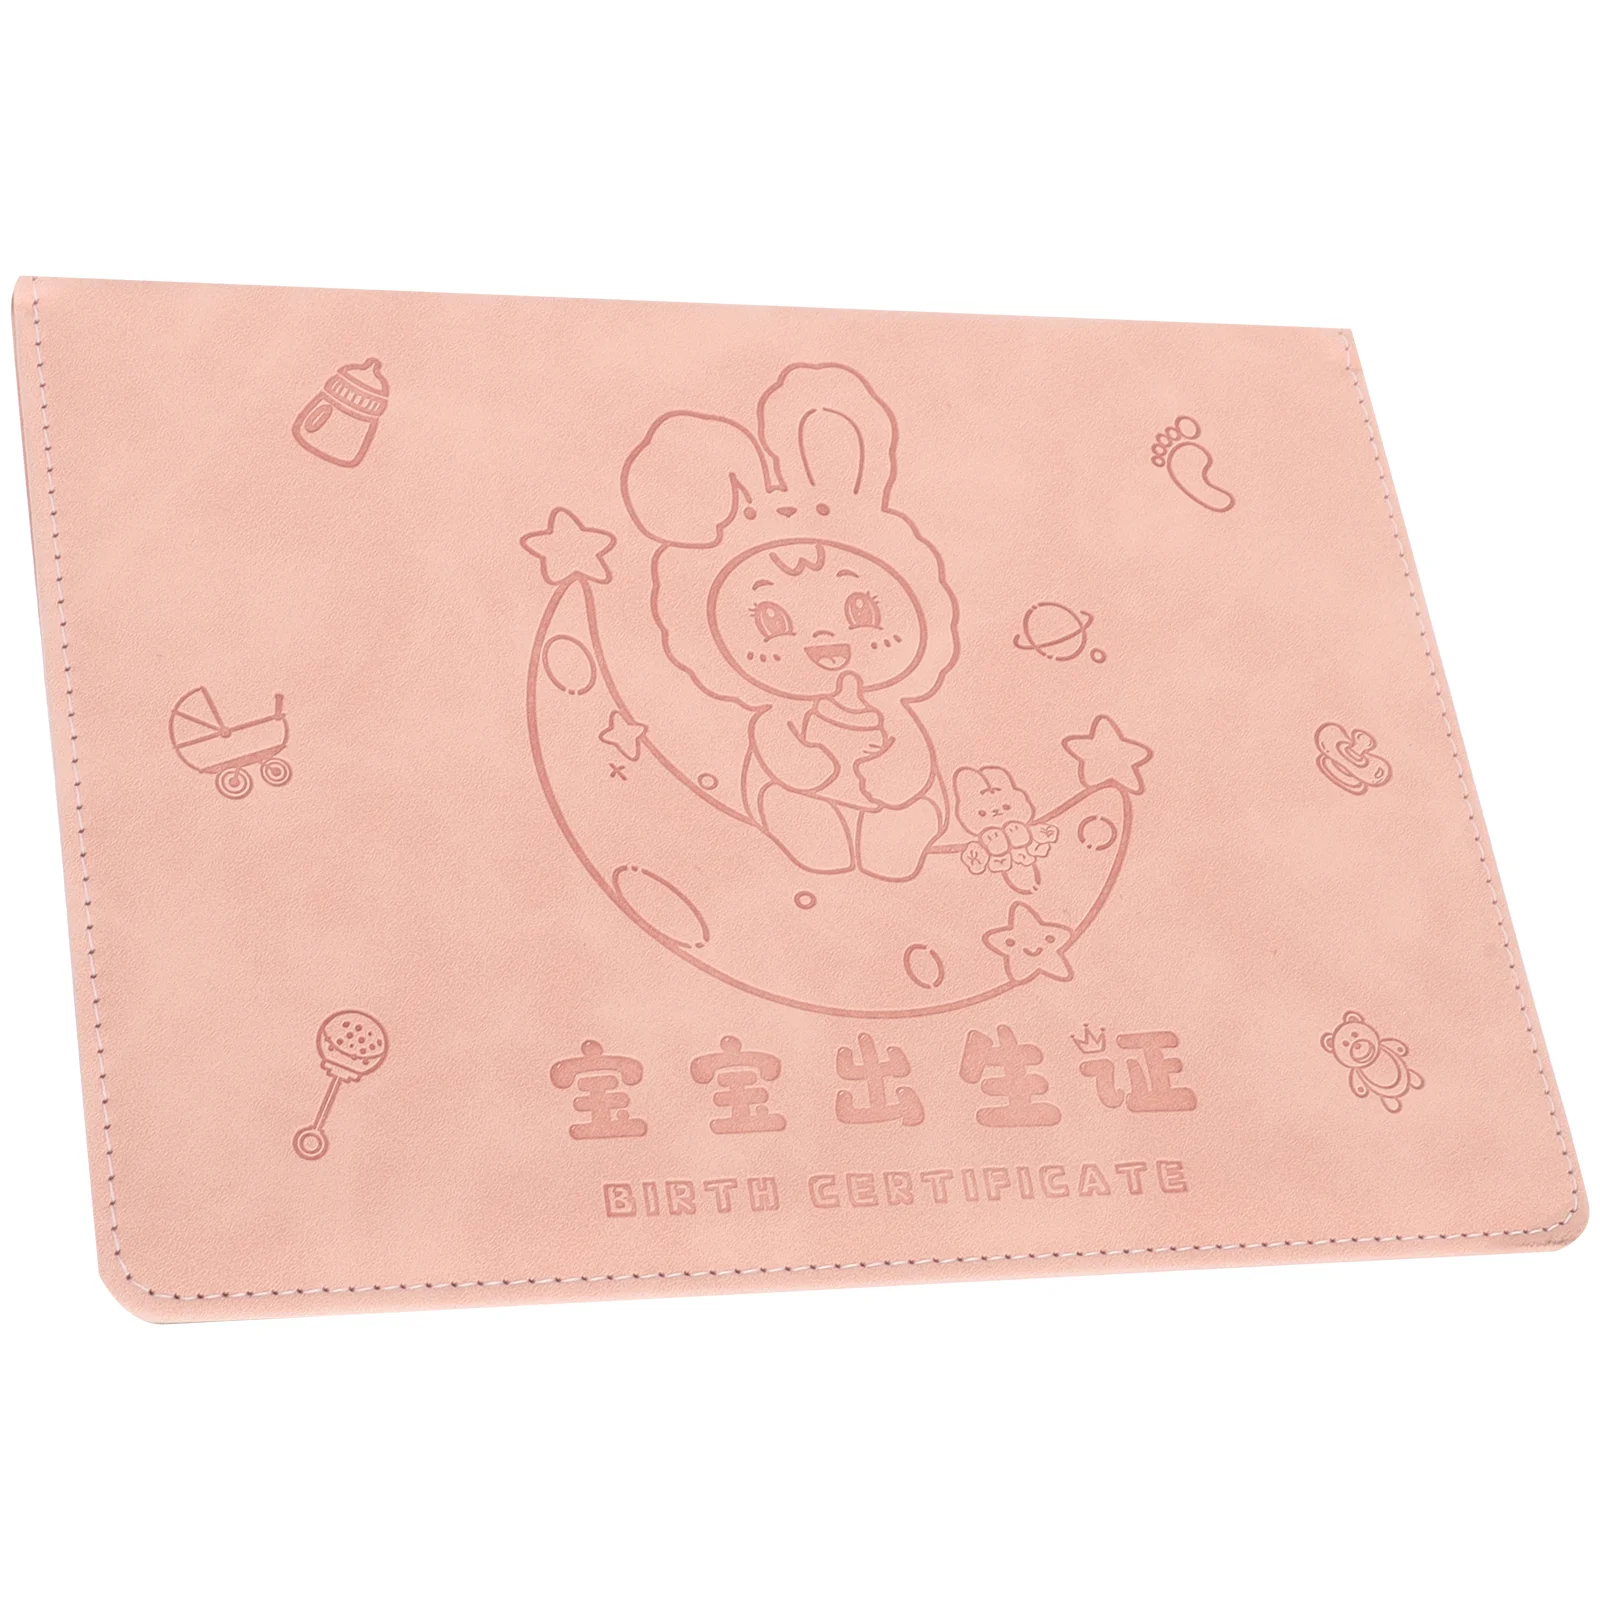 Birth Certificate Cover Case for Baby Holder Protective Protector Travel